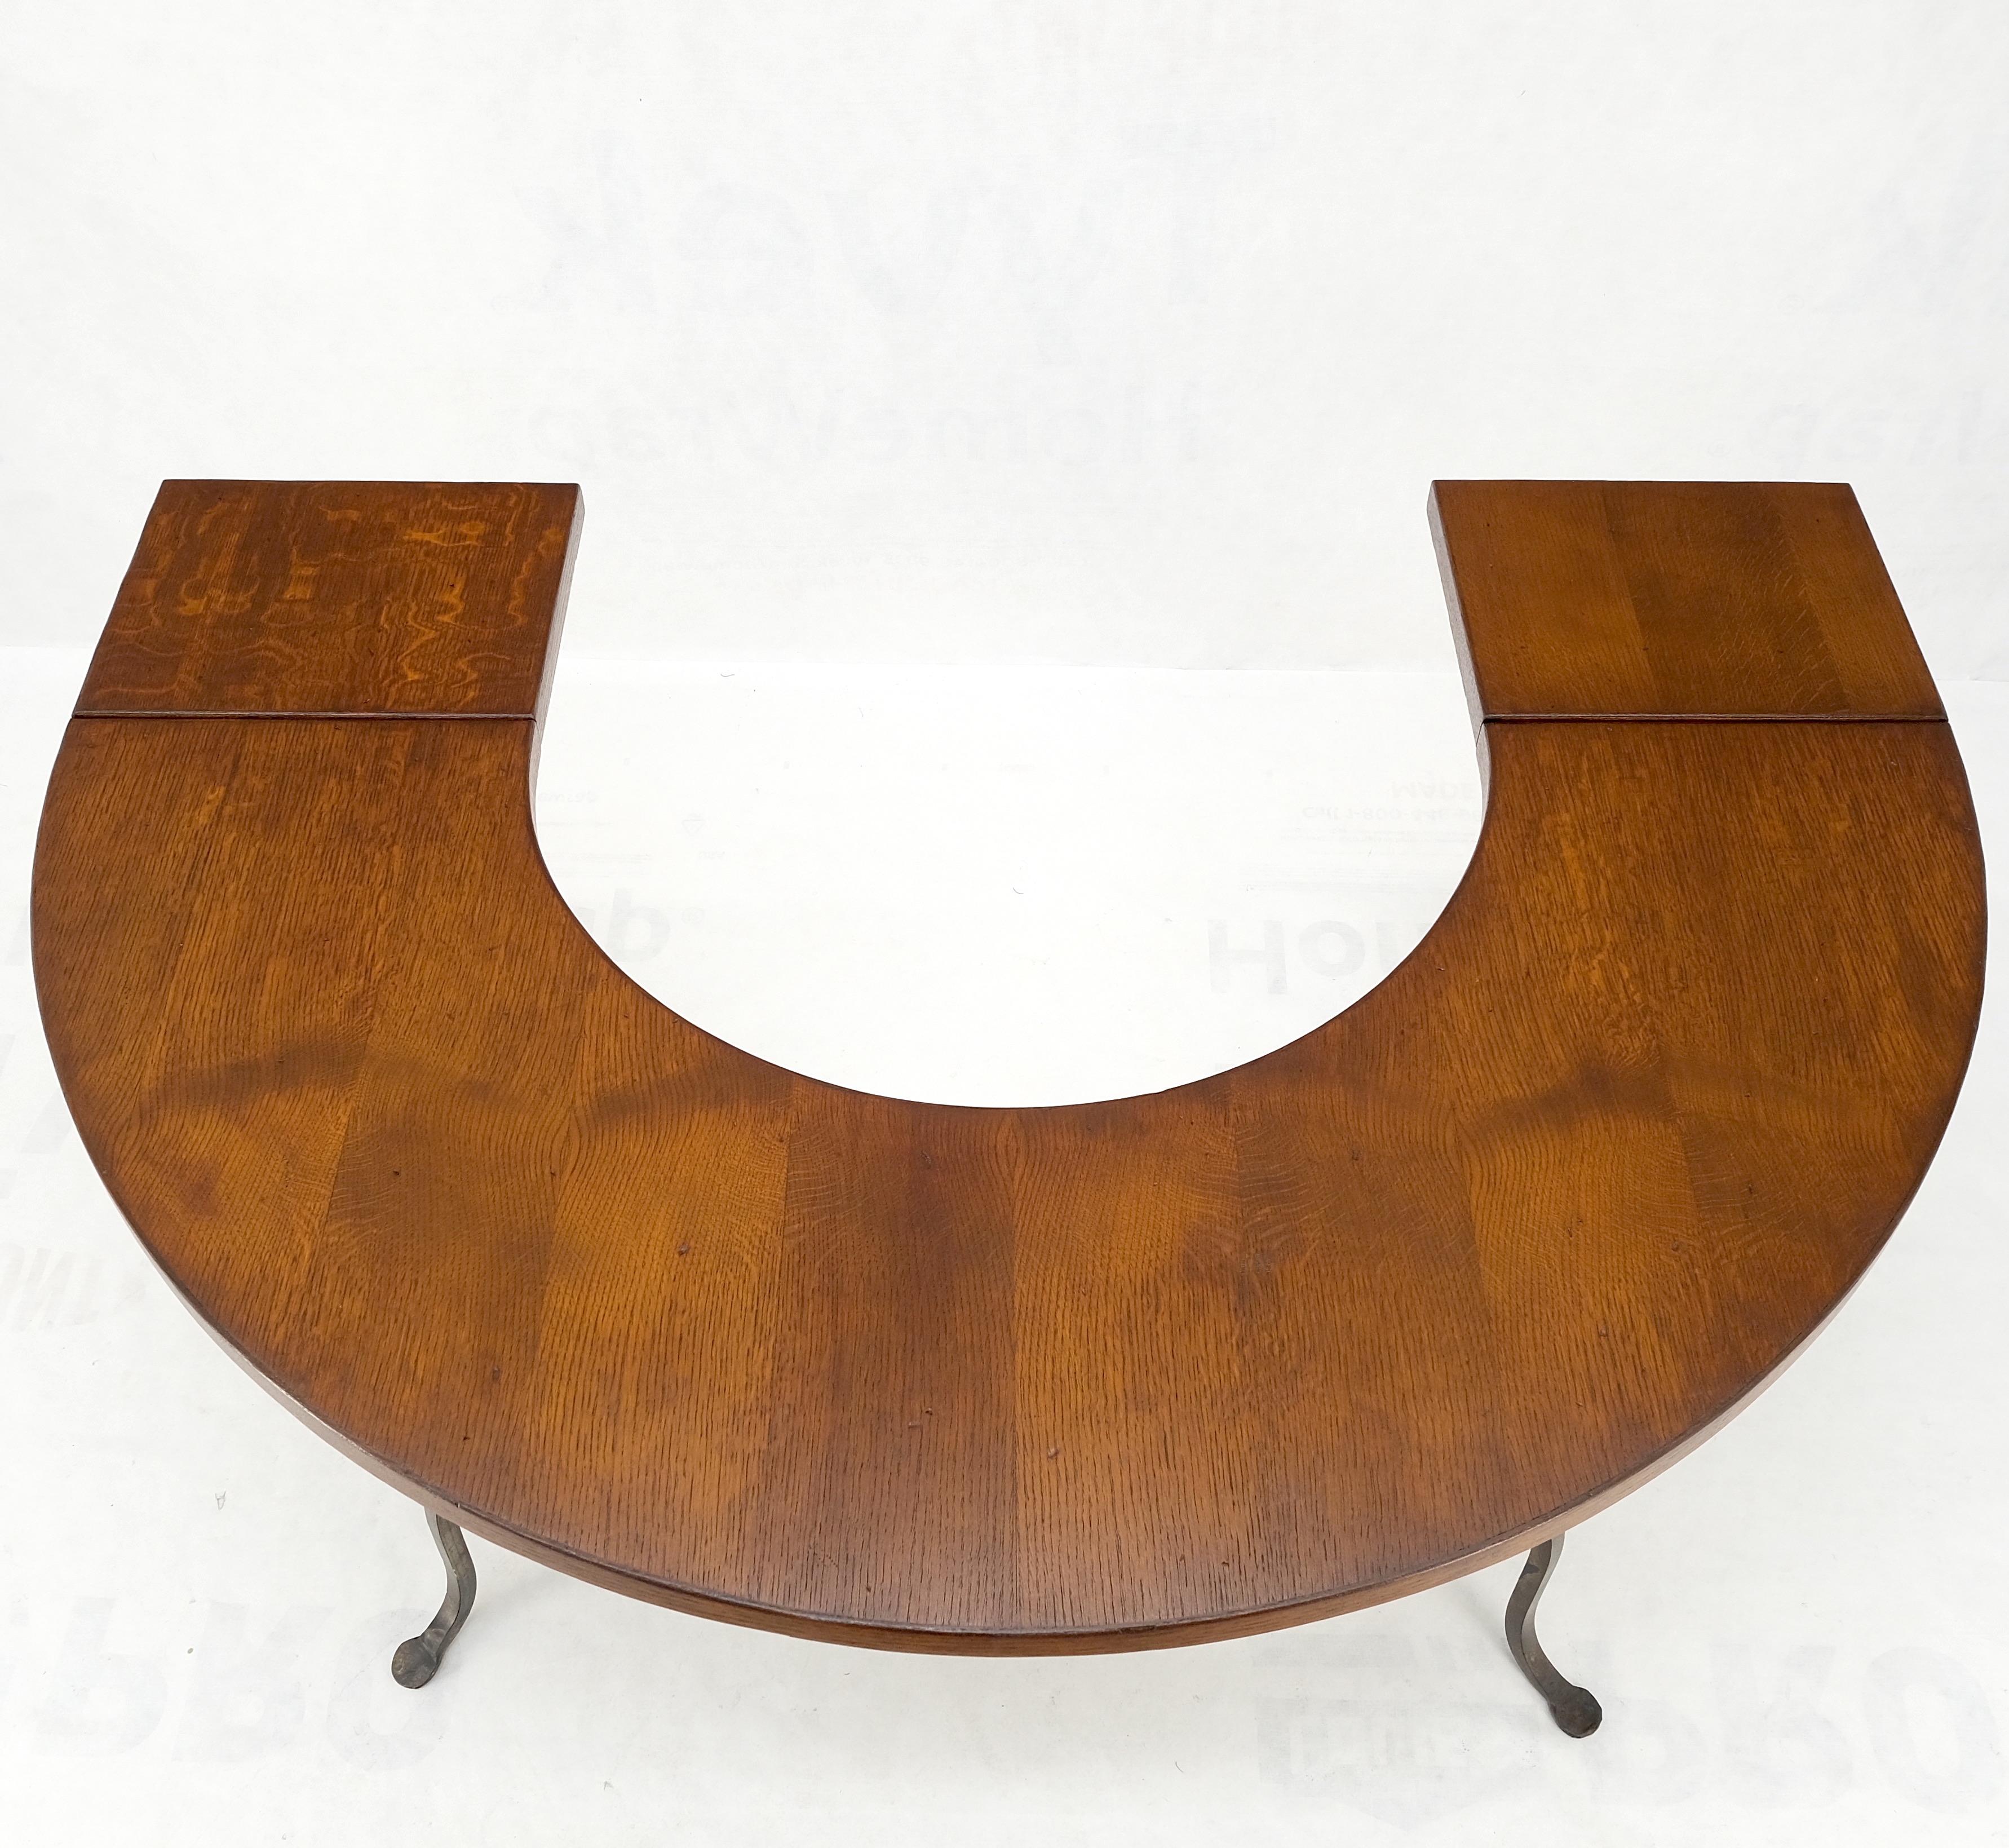 Half Round Horse Shoe Shape Drop Leaf Ends Serving Writing Library Gallery Table For Sale 3